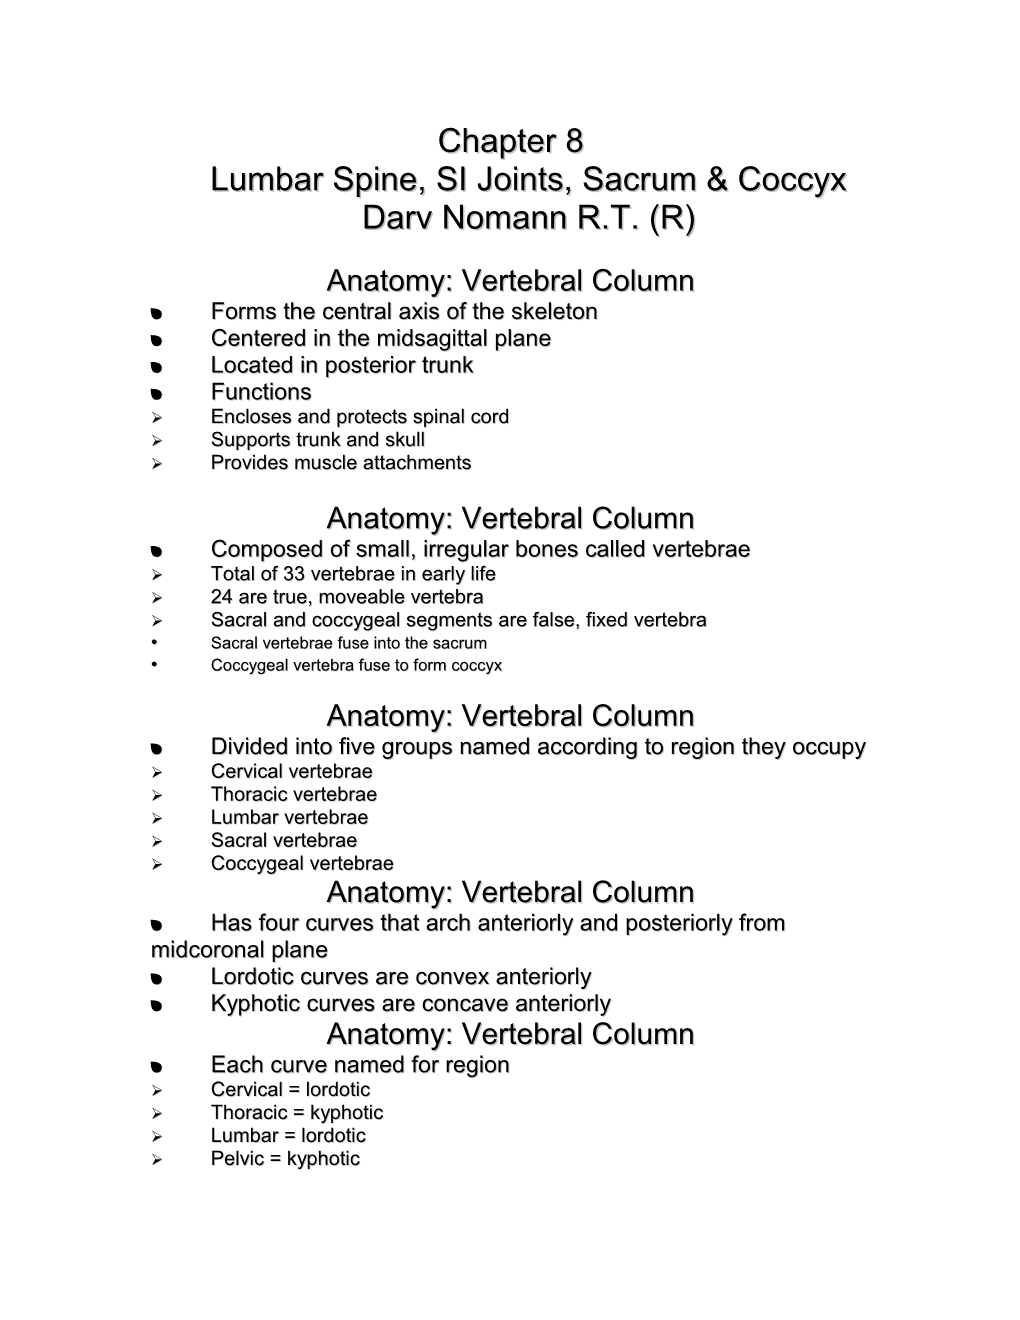 Chapter 8Lumbar Spine, SI Joints, Sacrum & Coccyxdarv Nomann R.T. (R)